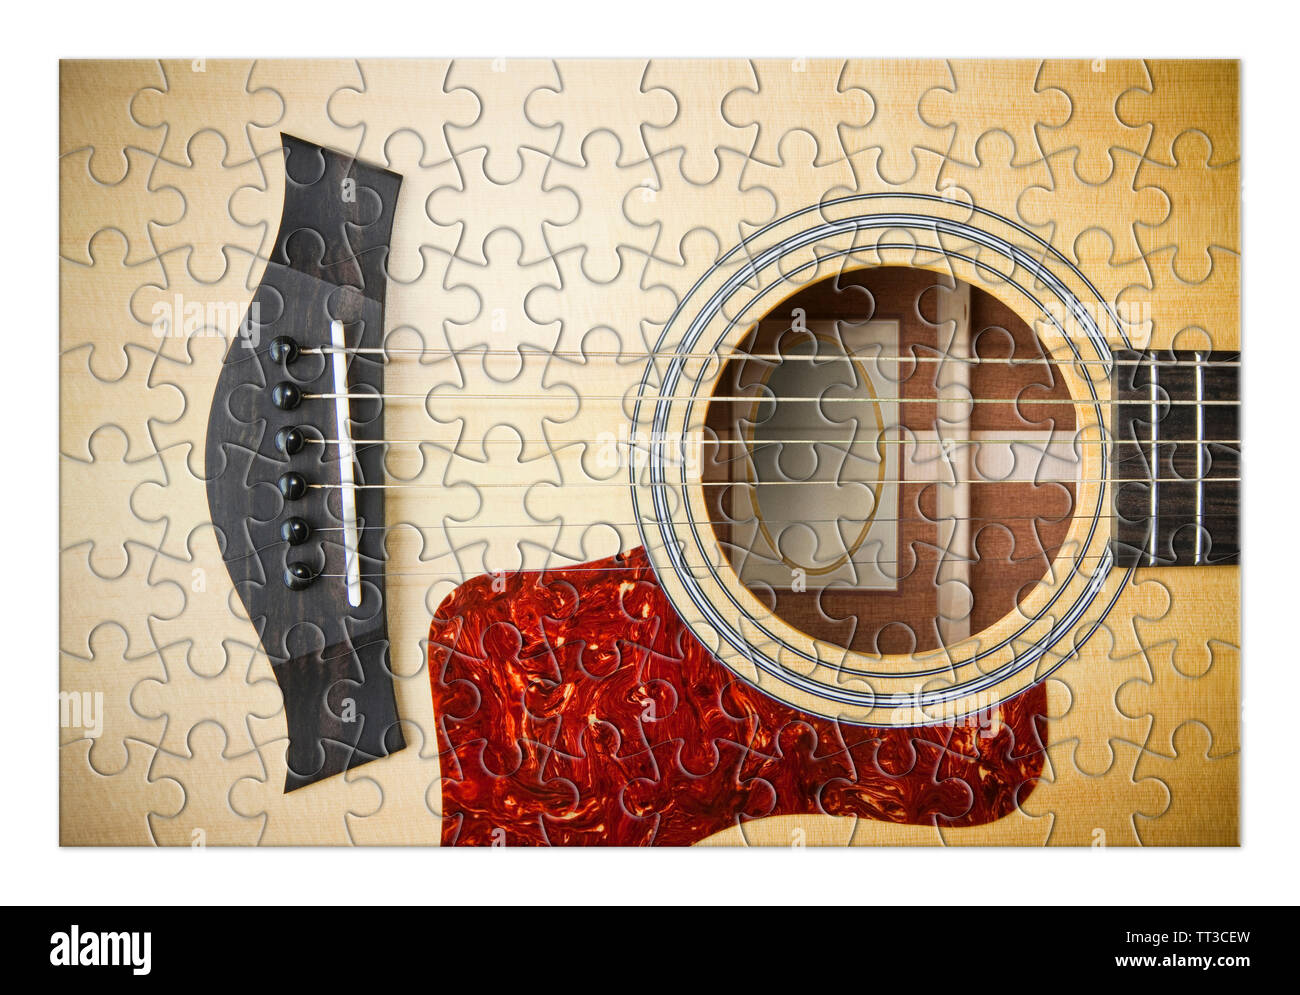 Patience and passion to learn to play the guitar step by step - concept image in puzzle shape Stock Photo